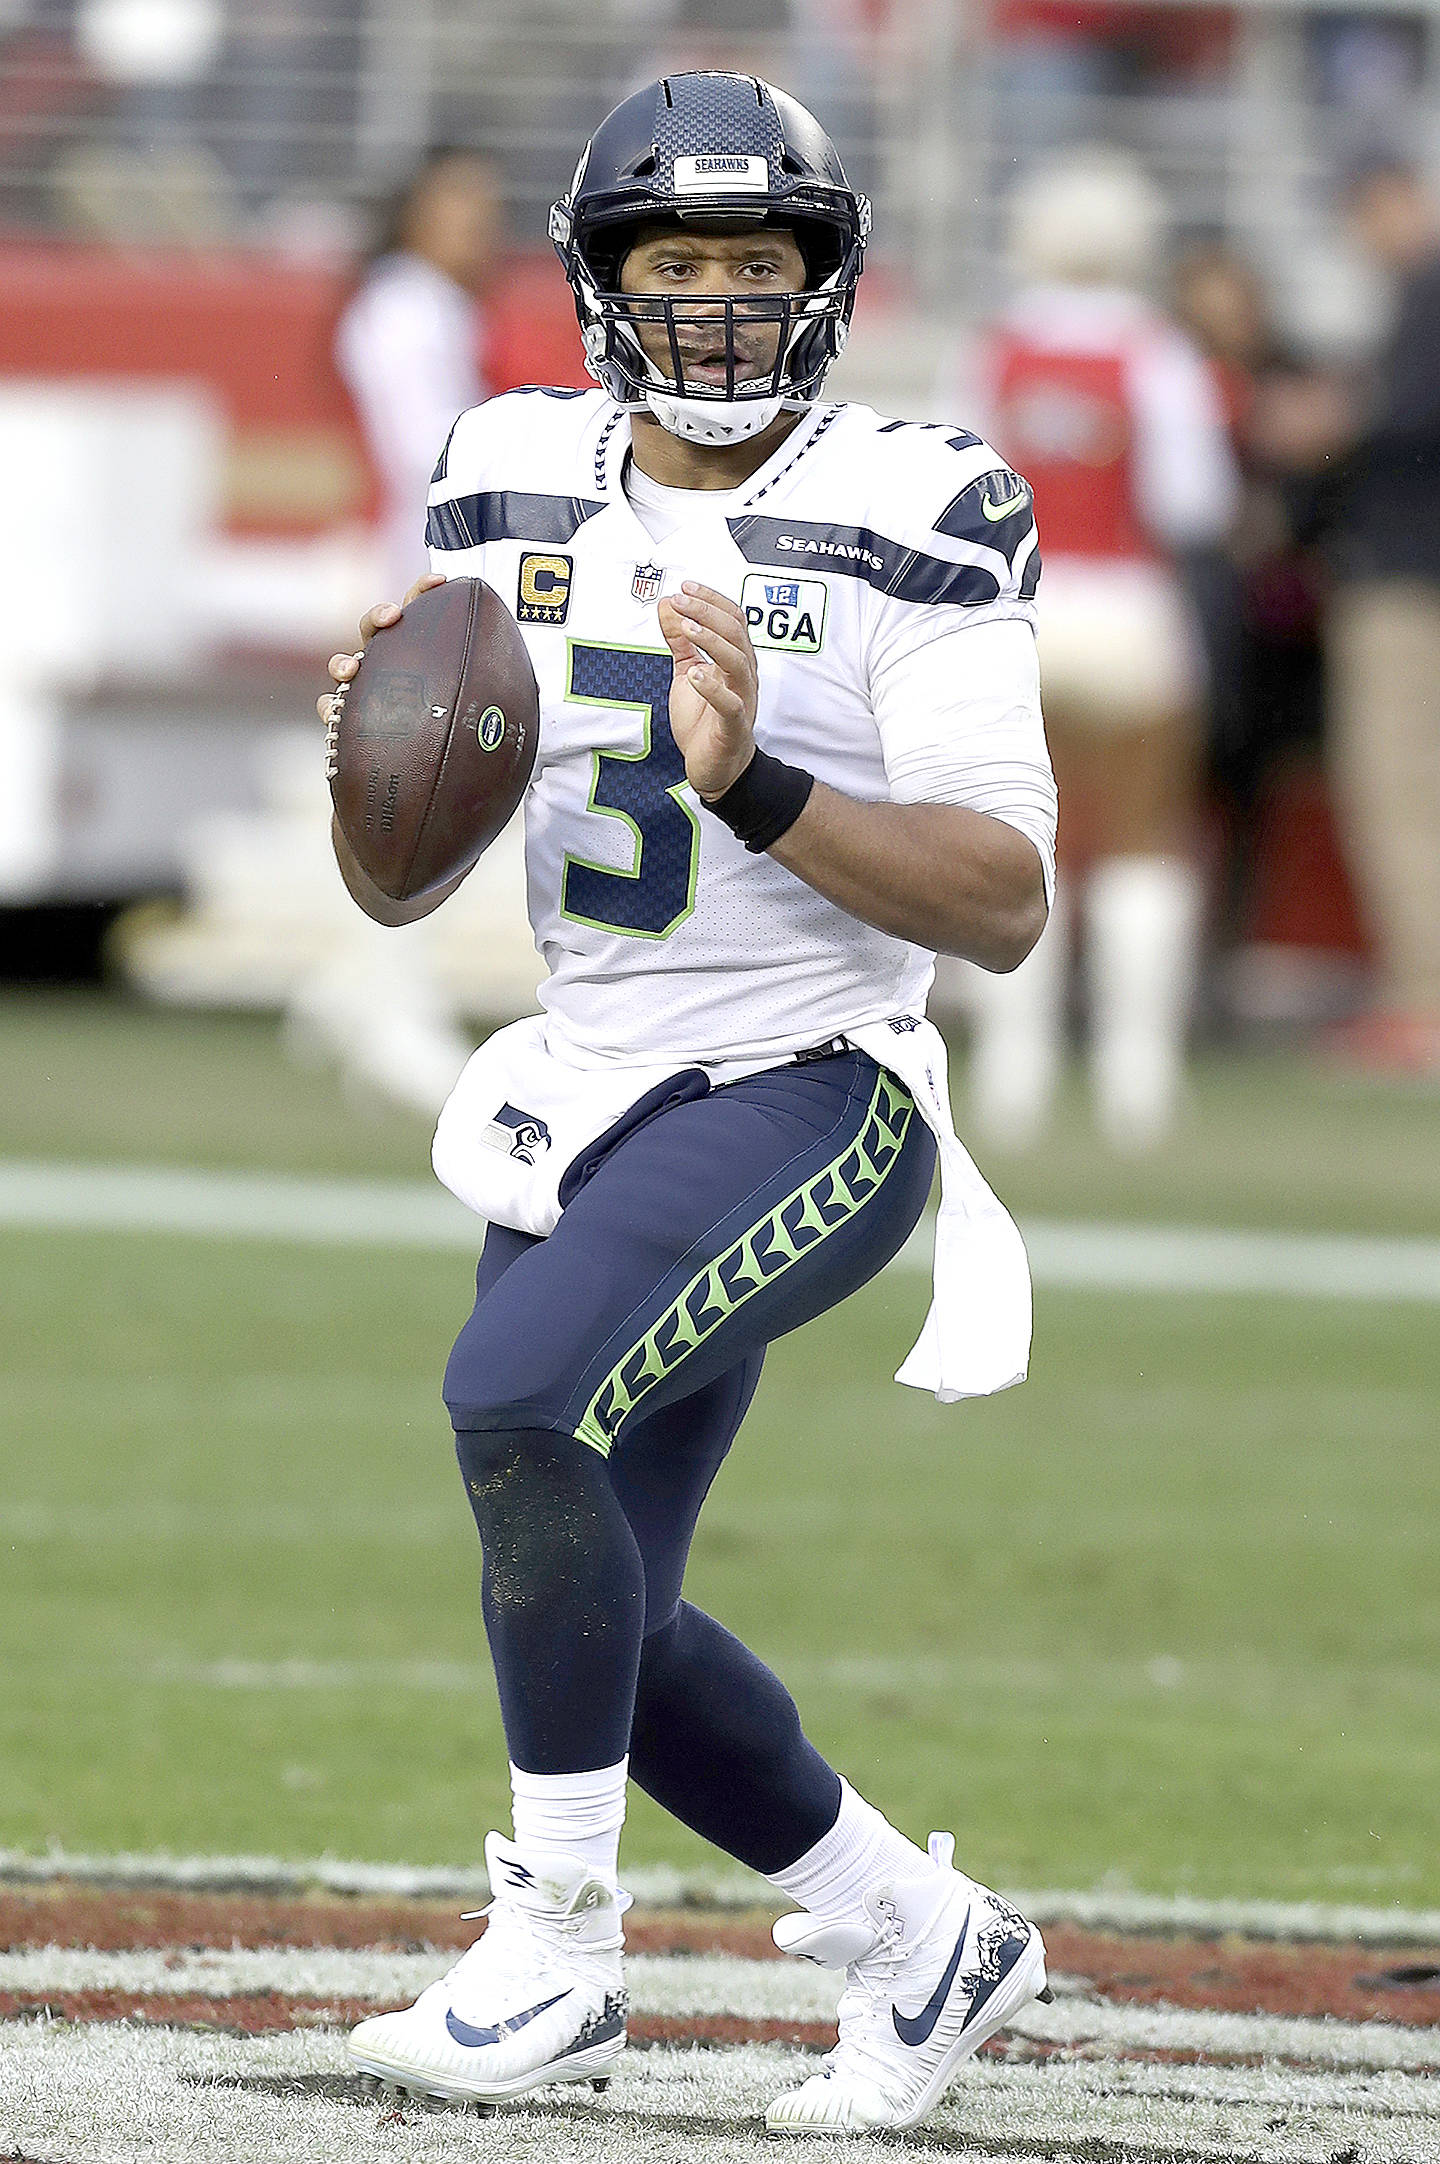 Russell Wilson of the Seattle Seahawks looks to pass the ball against the San Francisco 49ers during the Niners 26-23 overtime win over the Seahawks Sunday, December 16, 2018 at Levi’s Stadium in Santa Clara, CA.